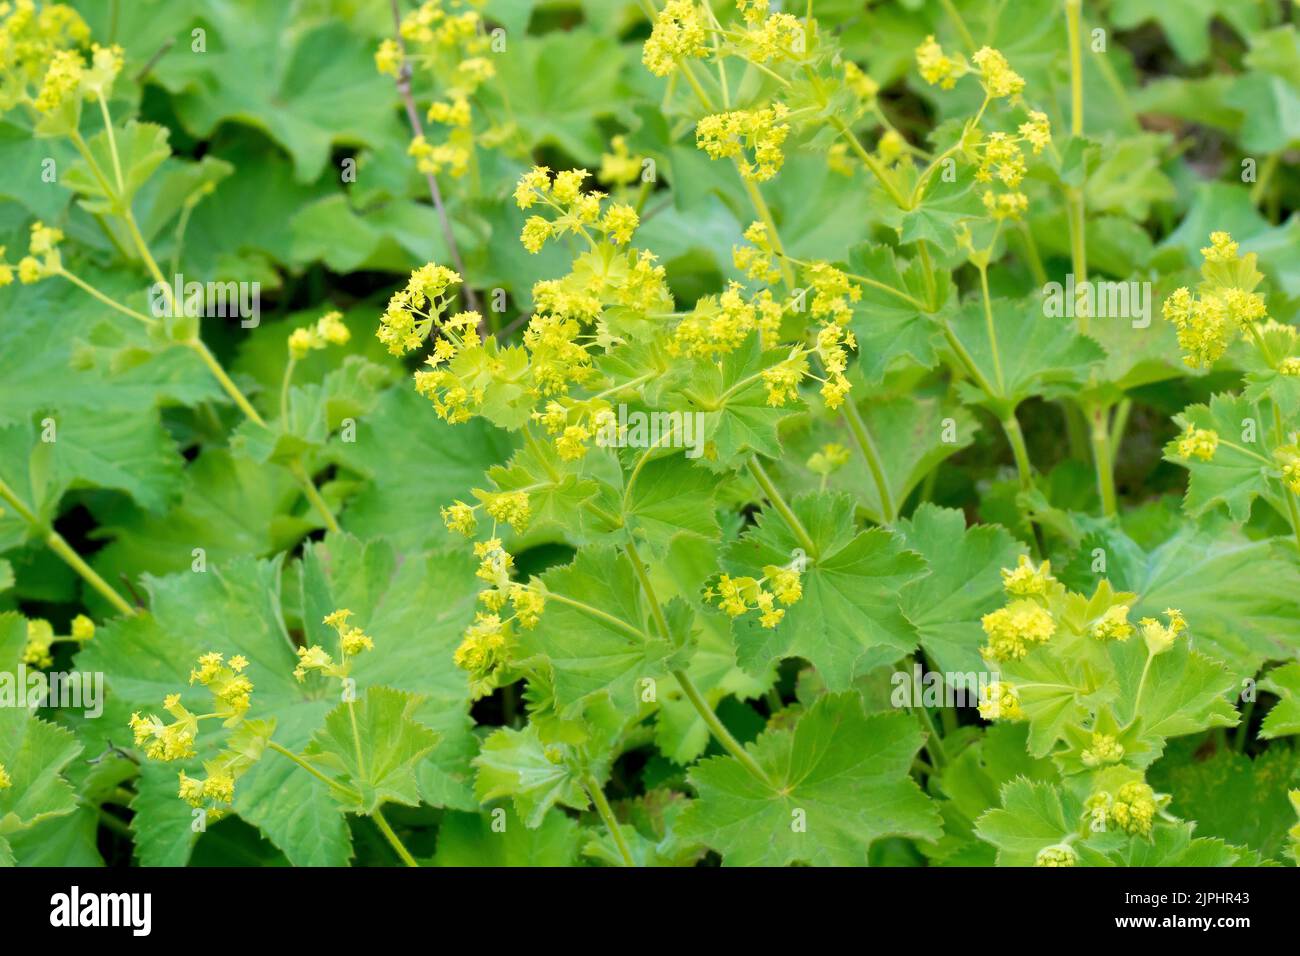 Lady's Mantle (alchemilla vulgaris), close of the common grassland plant showing the tiny yellowish flowers and large fan-shaped leaves. Stock Photo